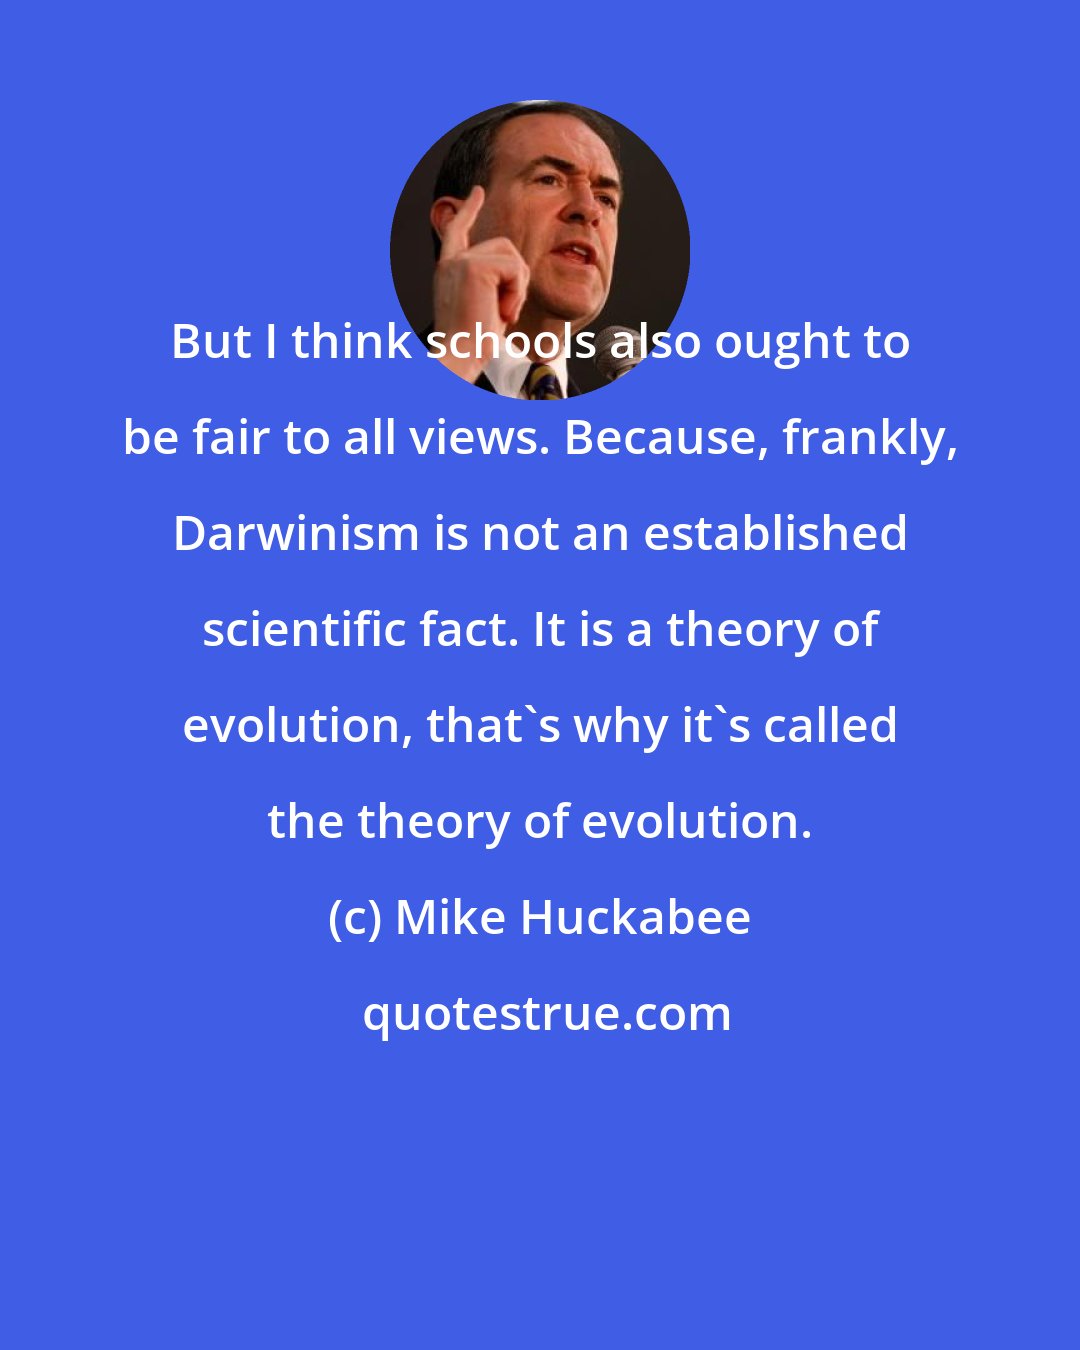 Mike Huckabee: But I think schools also ought to be fair to all views. Because, frankly, Darwinism is not an established scientific fact. It is a theory of evolution, that's why it's called the theory of evolution.